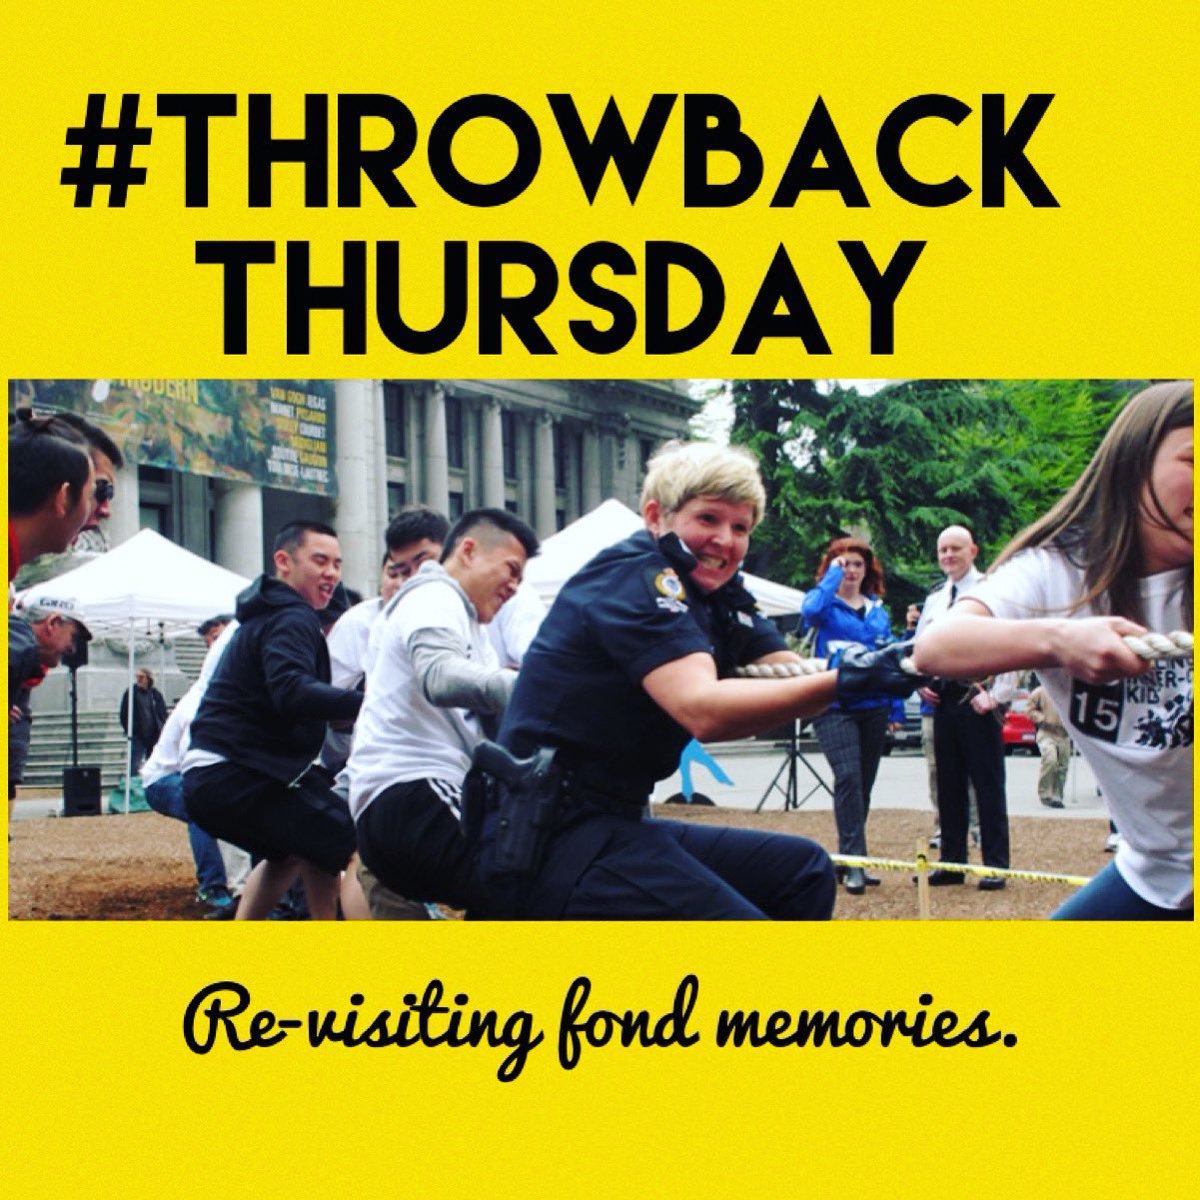 #ThrowbackThursday #TBT - School Liaison Officer, Sgt. Vance, joining the tug-of-war with local students to fundraise for CLICK (Contributing to the Lives of Inner City Kids). #GoTeam #PullingTogether @VPDRecruiting